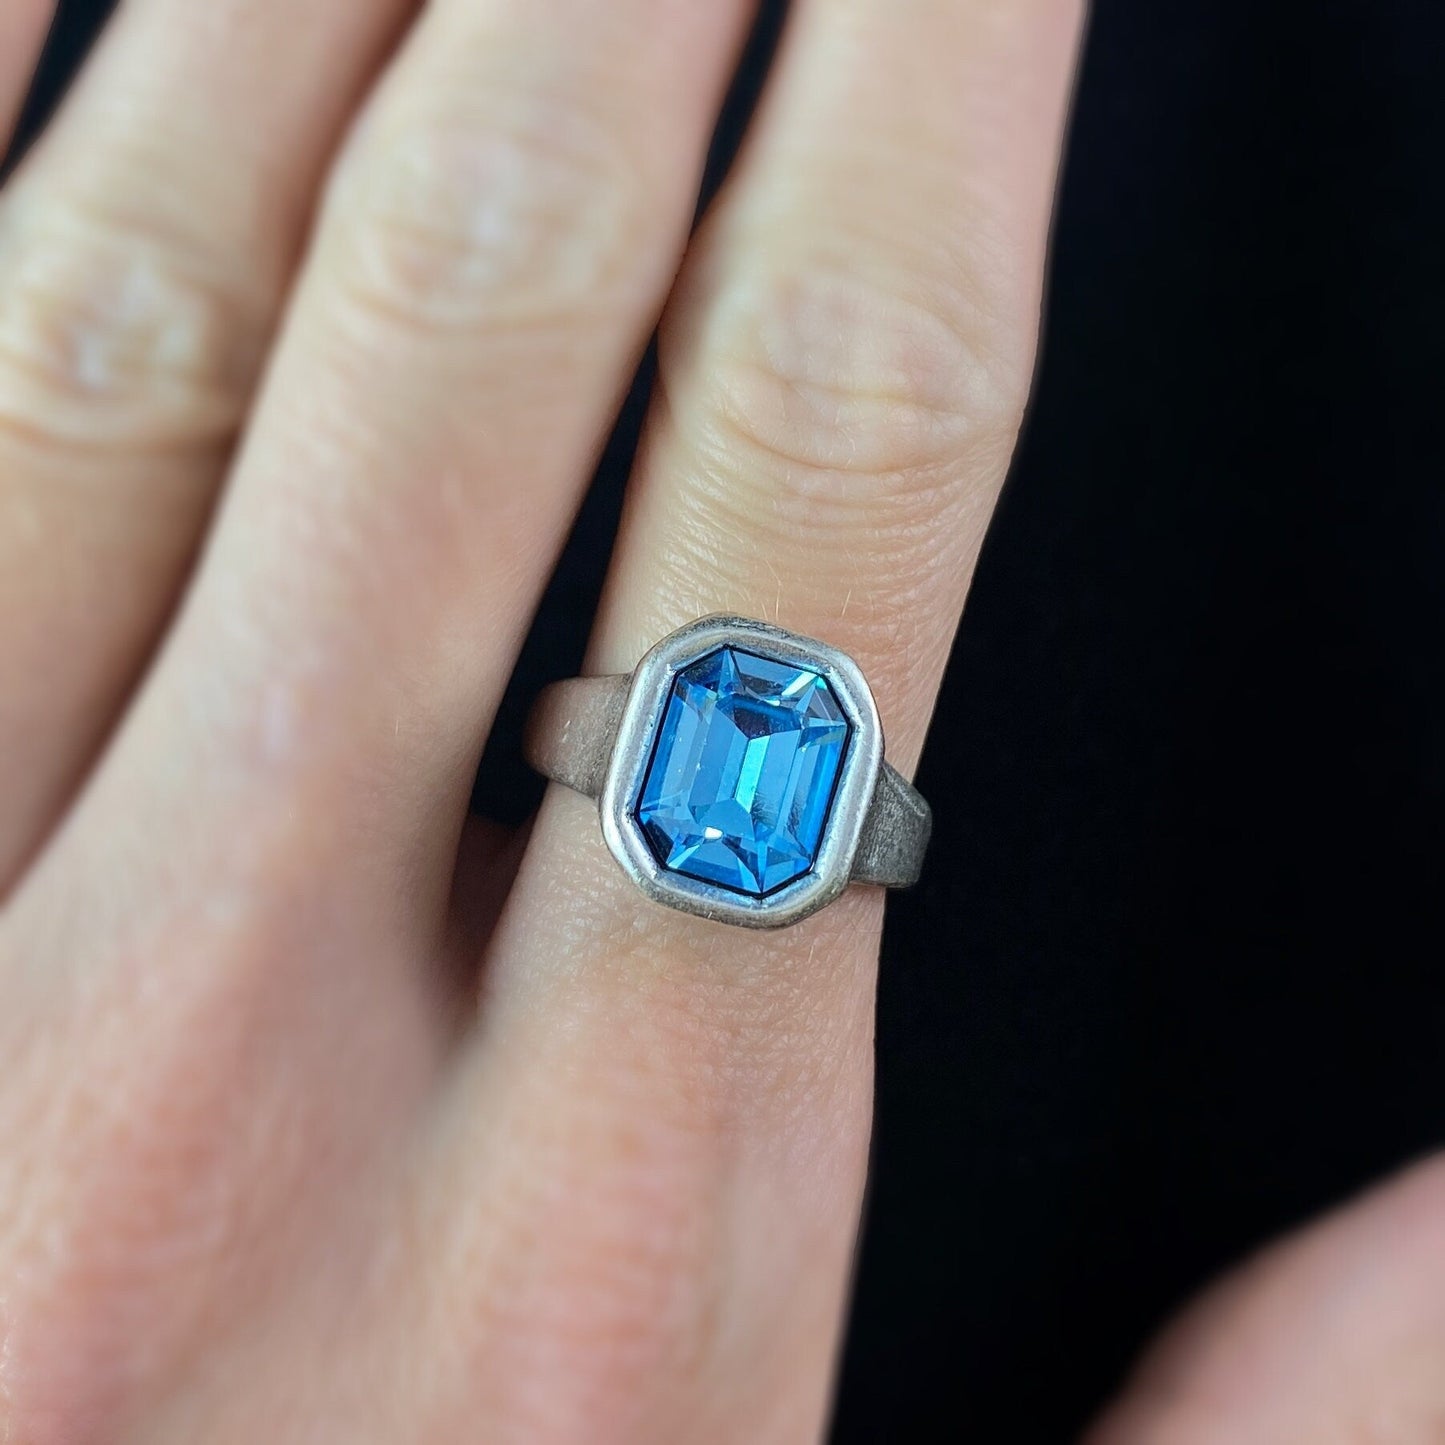 Silver Ring with Blue Crystal, Handmade, Nickel Free